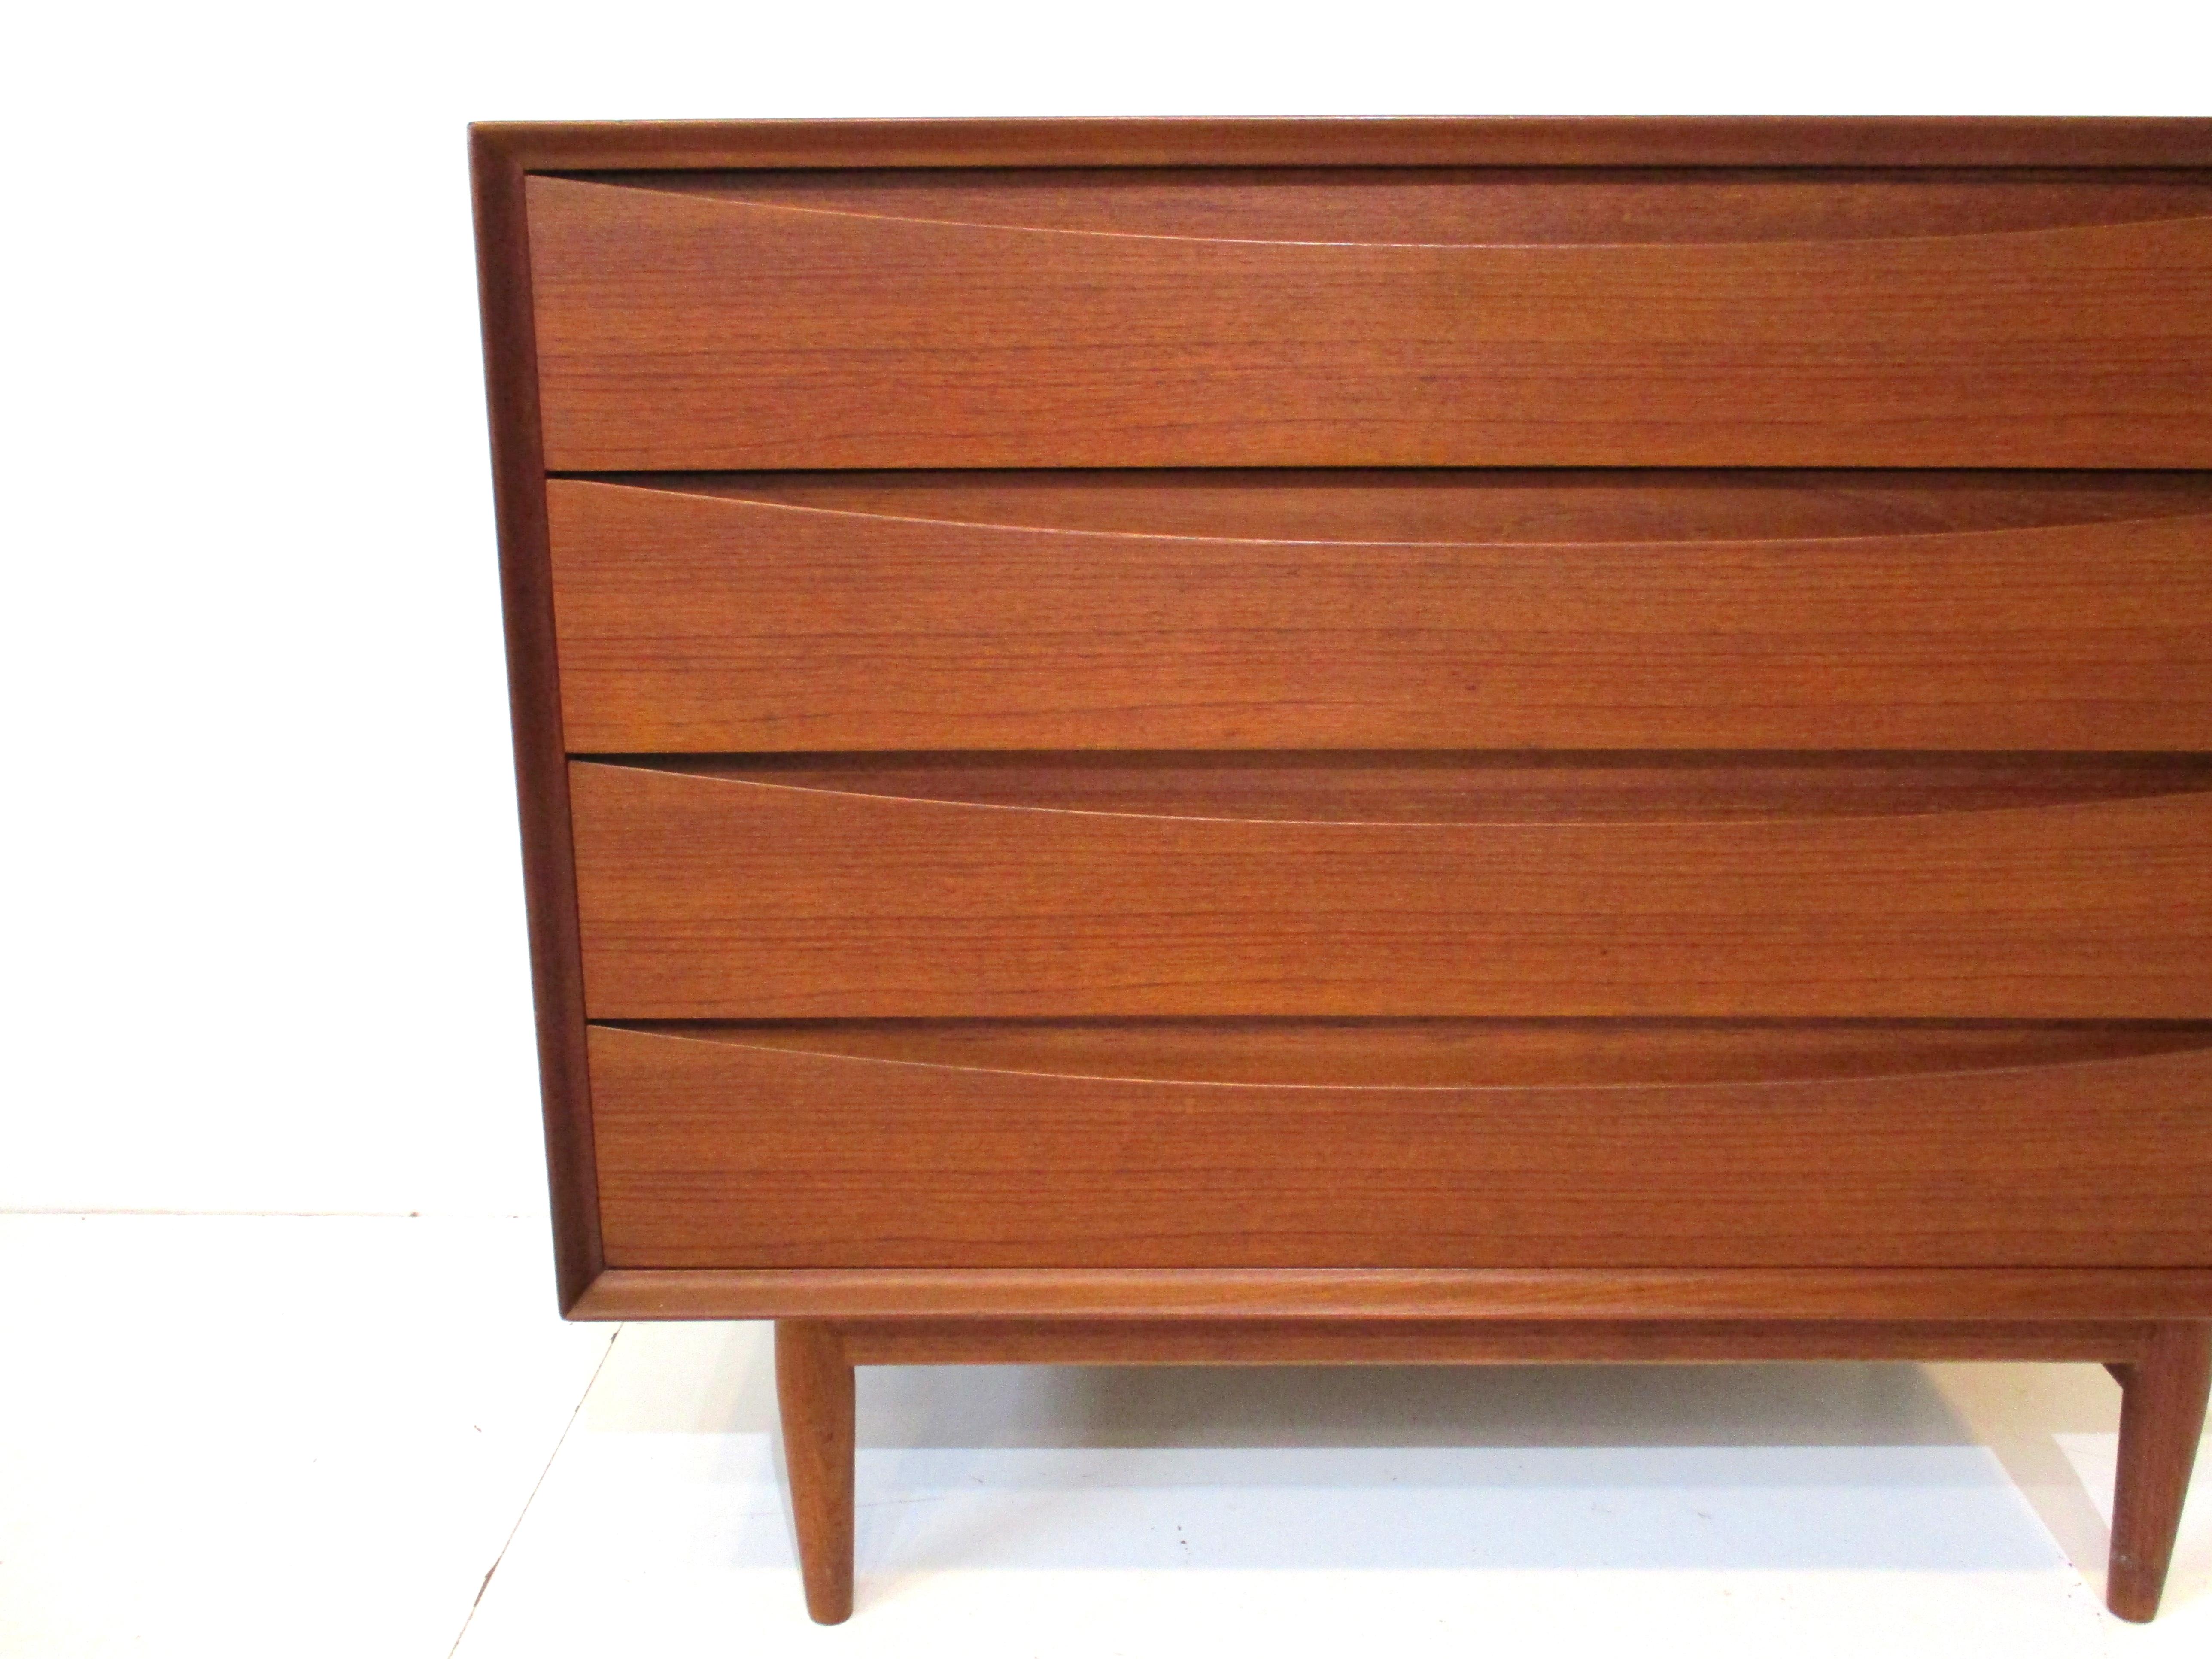 A very well crafted teak four drawer dresser chest with cats eye drawer fronts which was a signature statement of the iconic designer Arne Vodder. Matching teak conical legs with cross stretchers make the piece sturdy and the backside is finished in